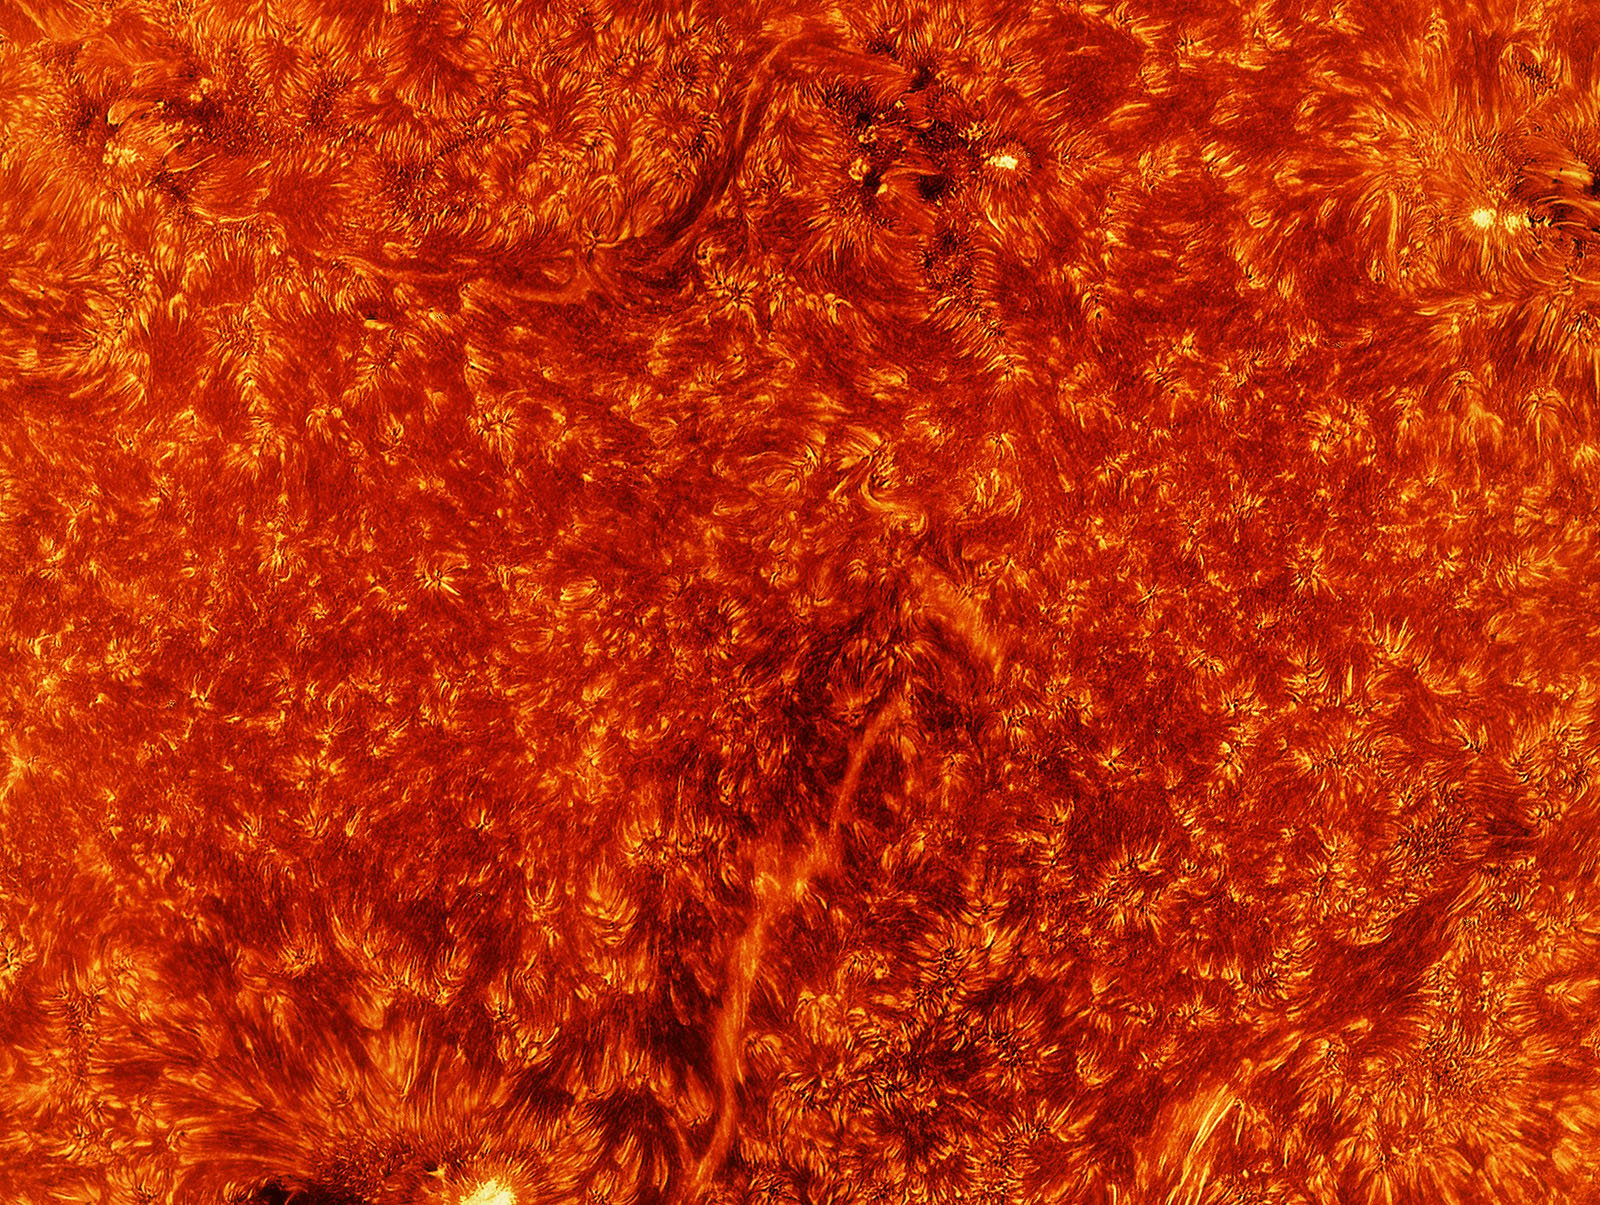 Photographer's 400-Megapixel Image of the Sun is Made up of 100K Photos ...